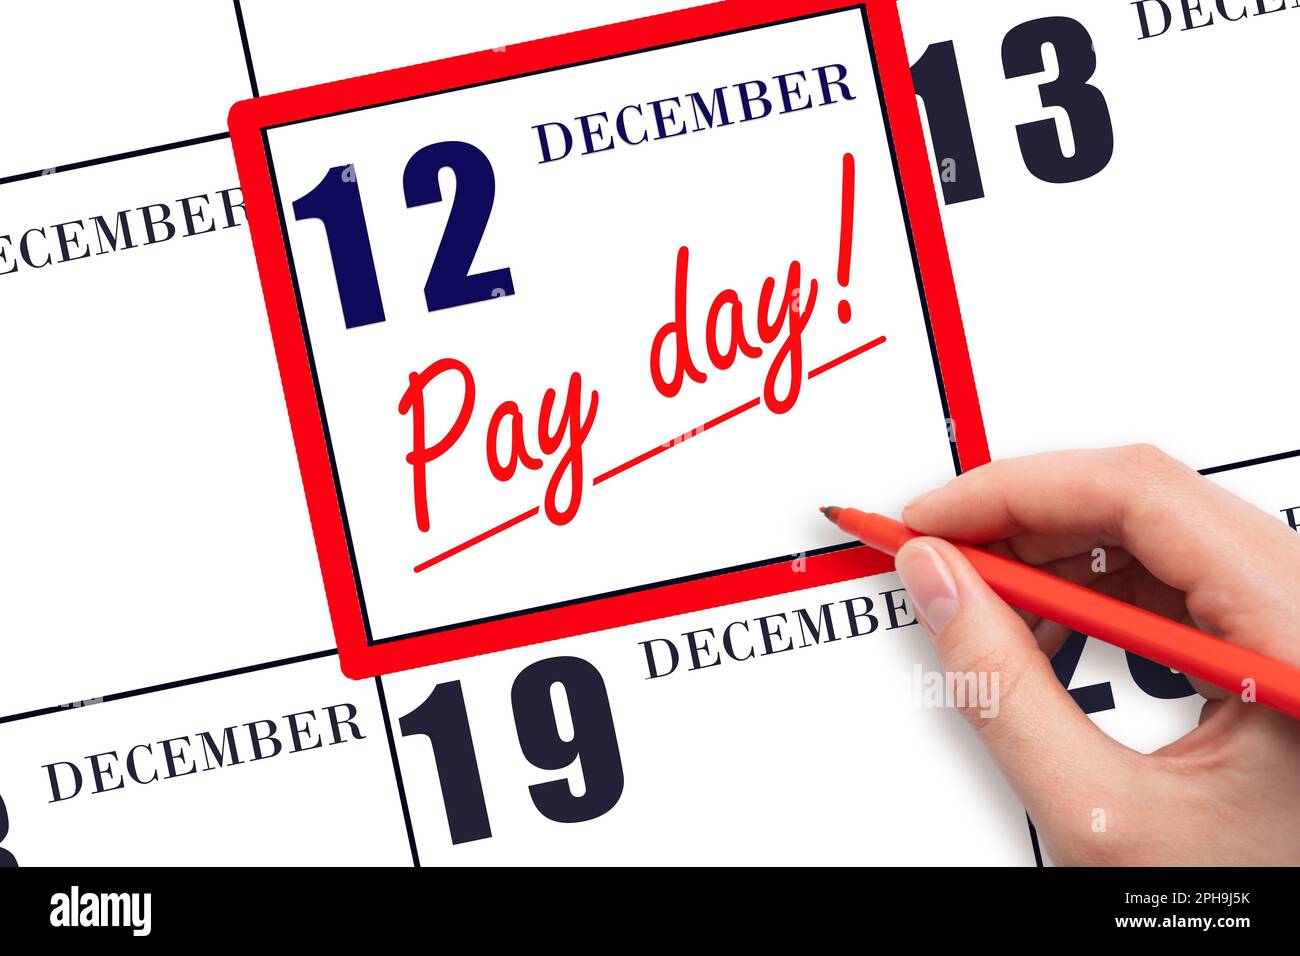 12th day of December. Hand writing text PAY DATE on calendar date December 12 and underline it. Payment due date. Reminder concept of payment. Winter Stock Photo